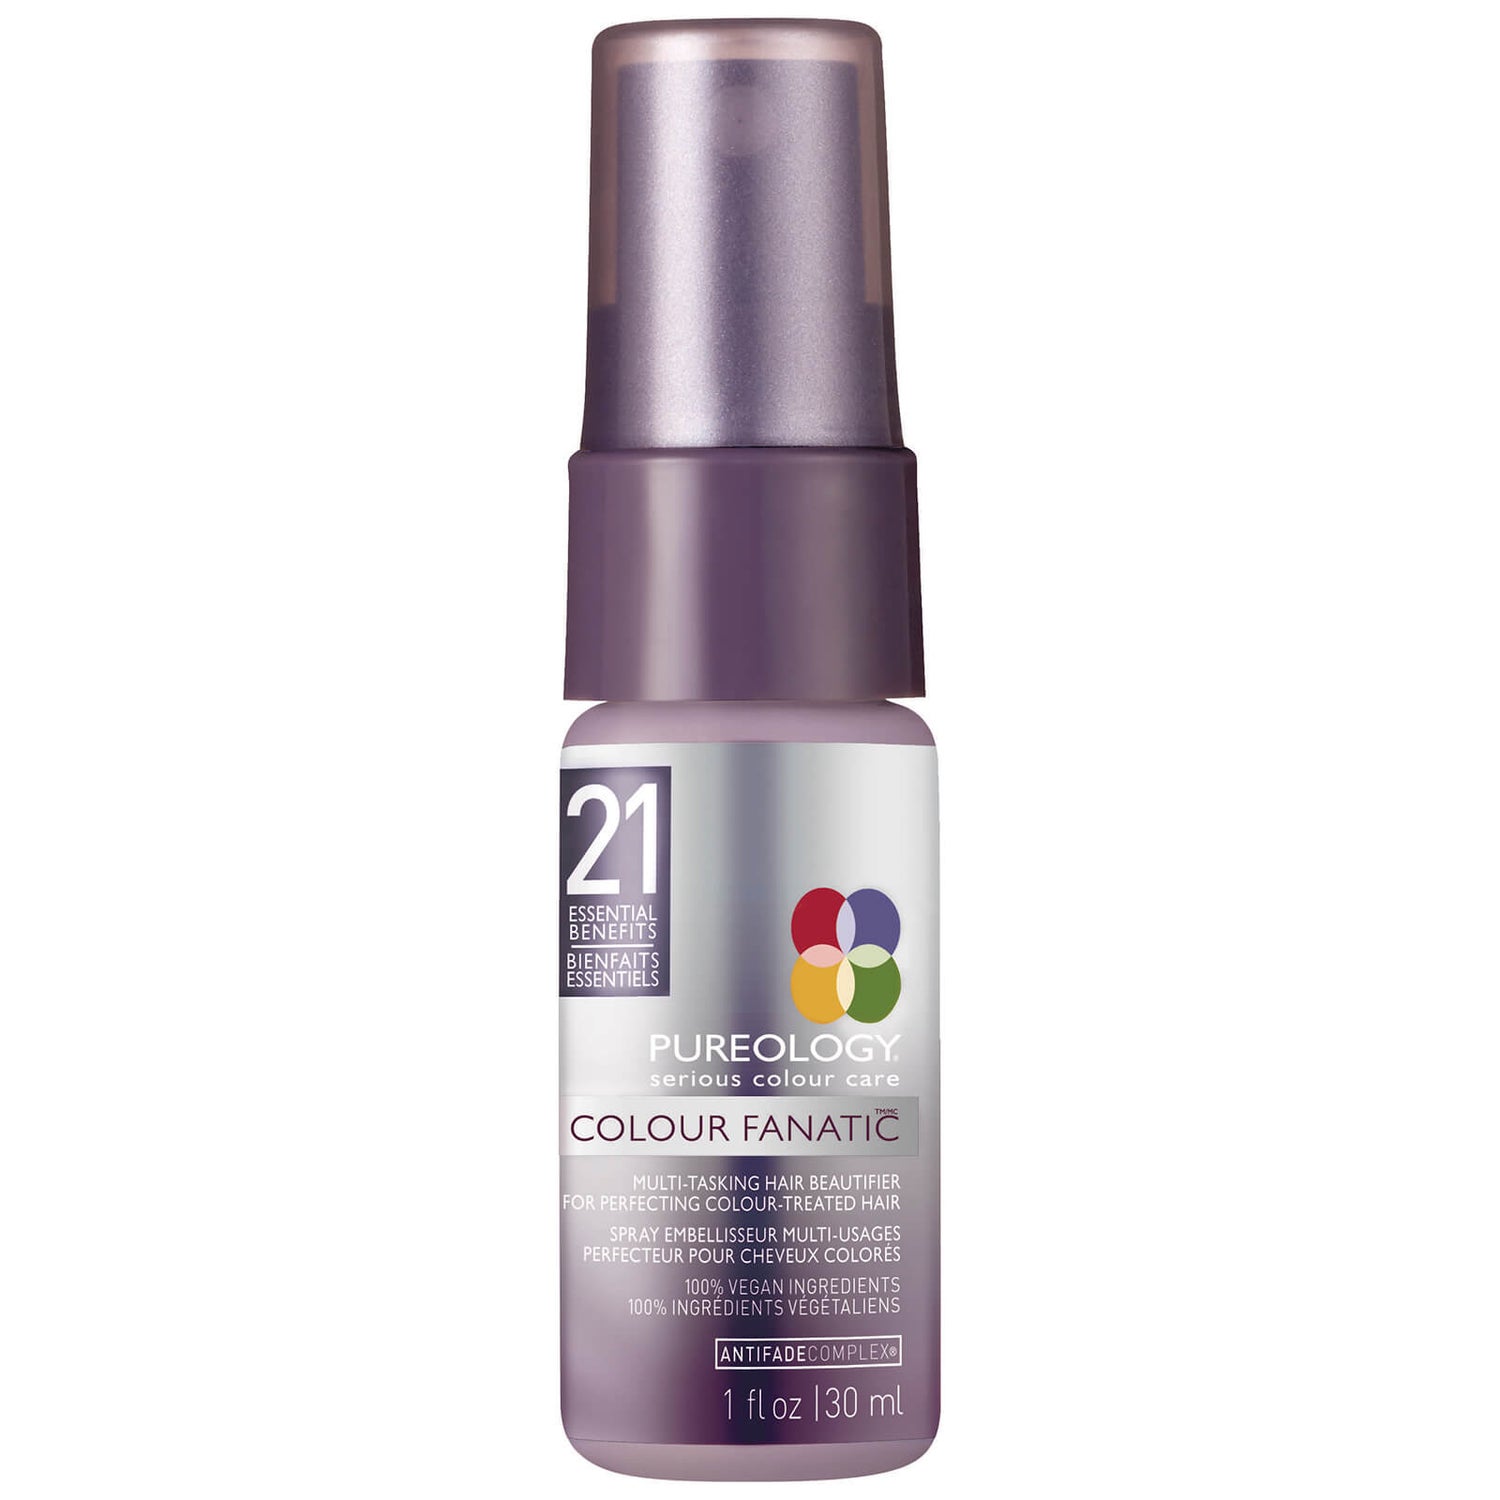 Pureology Colour Fanatic Multi-Benefit Leave-In Treatment Spray 1 oz ...